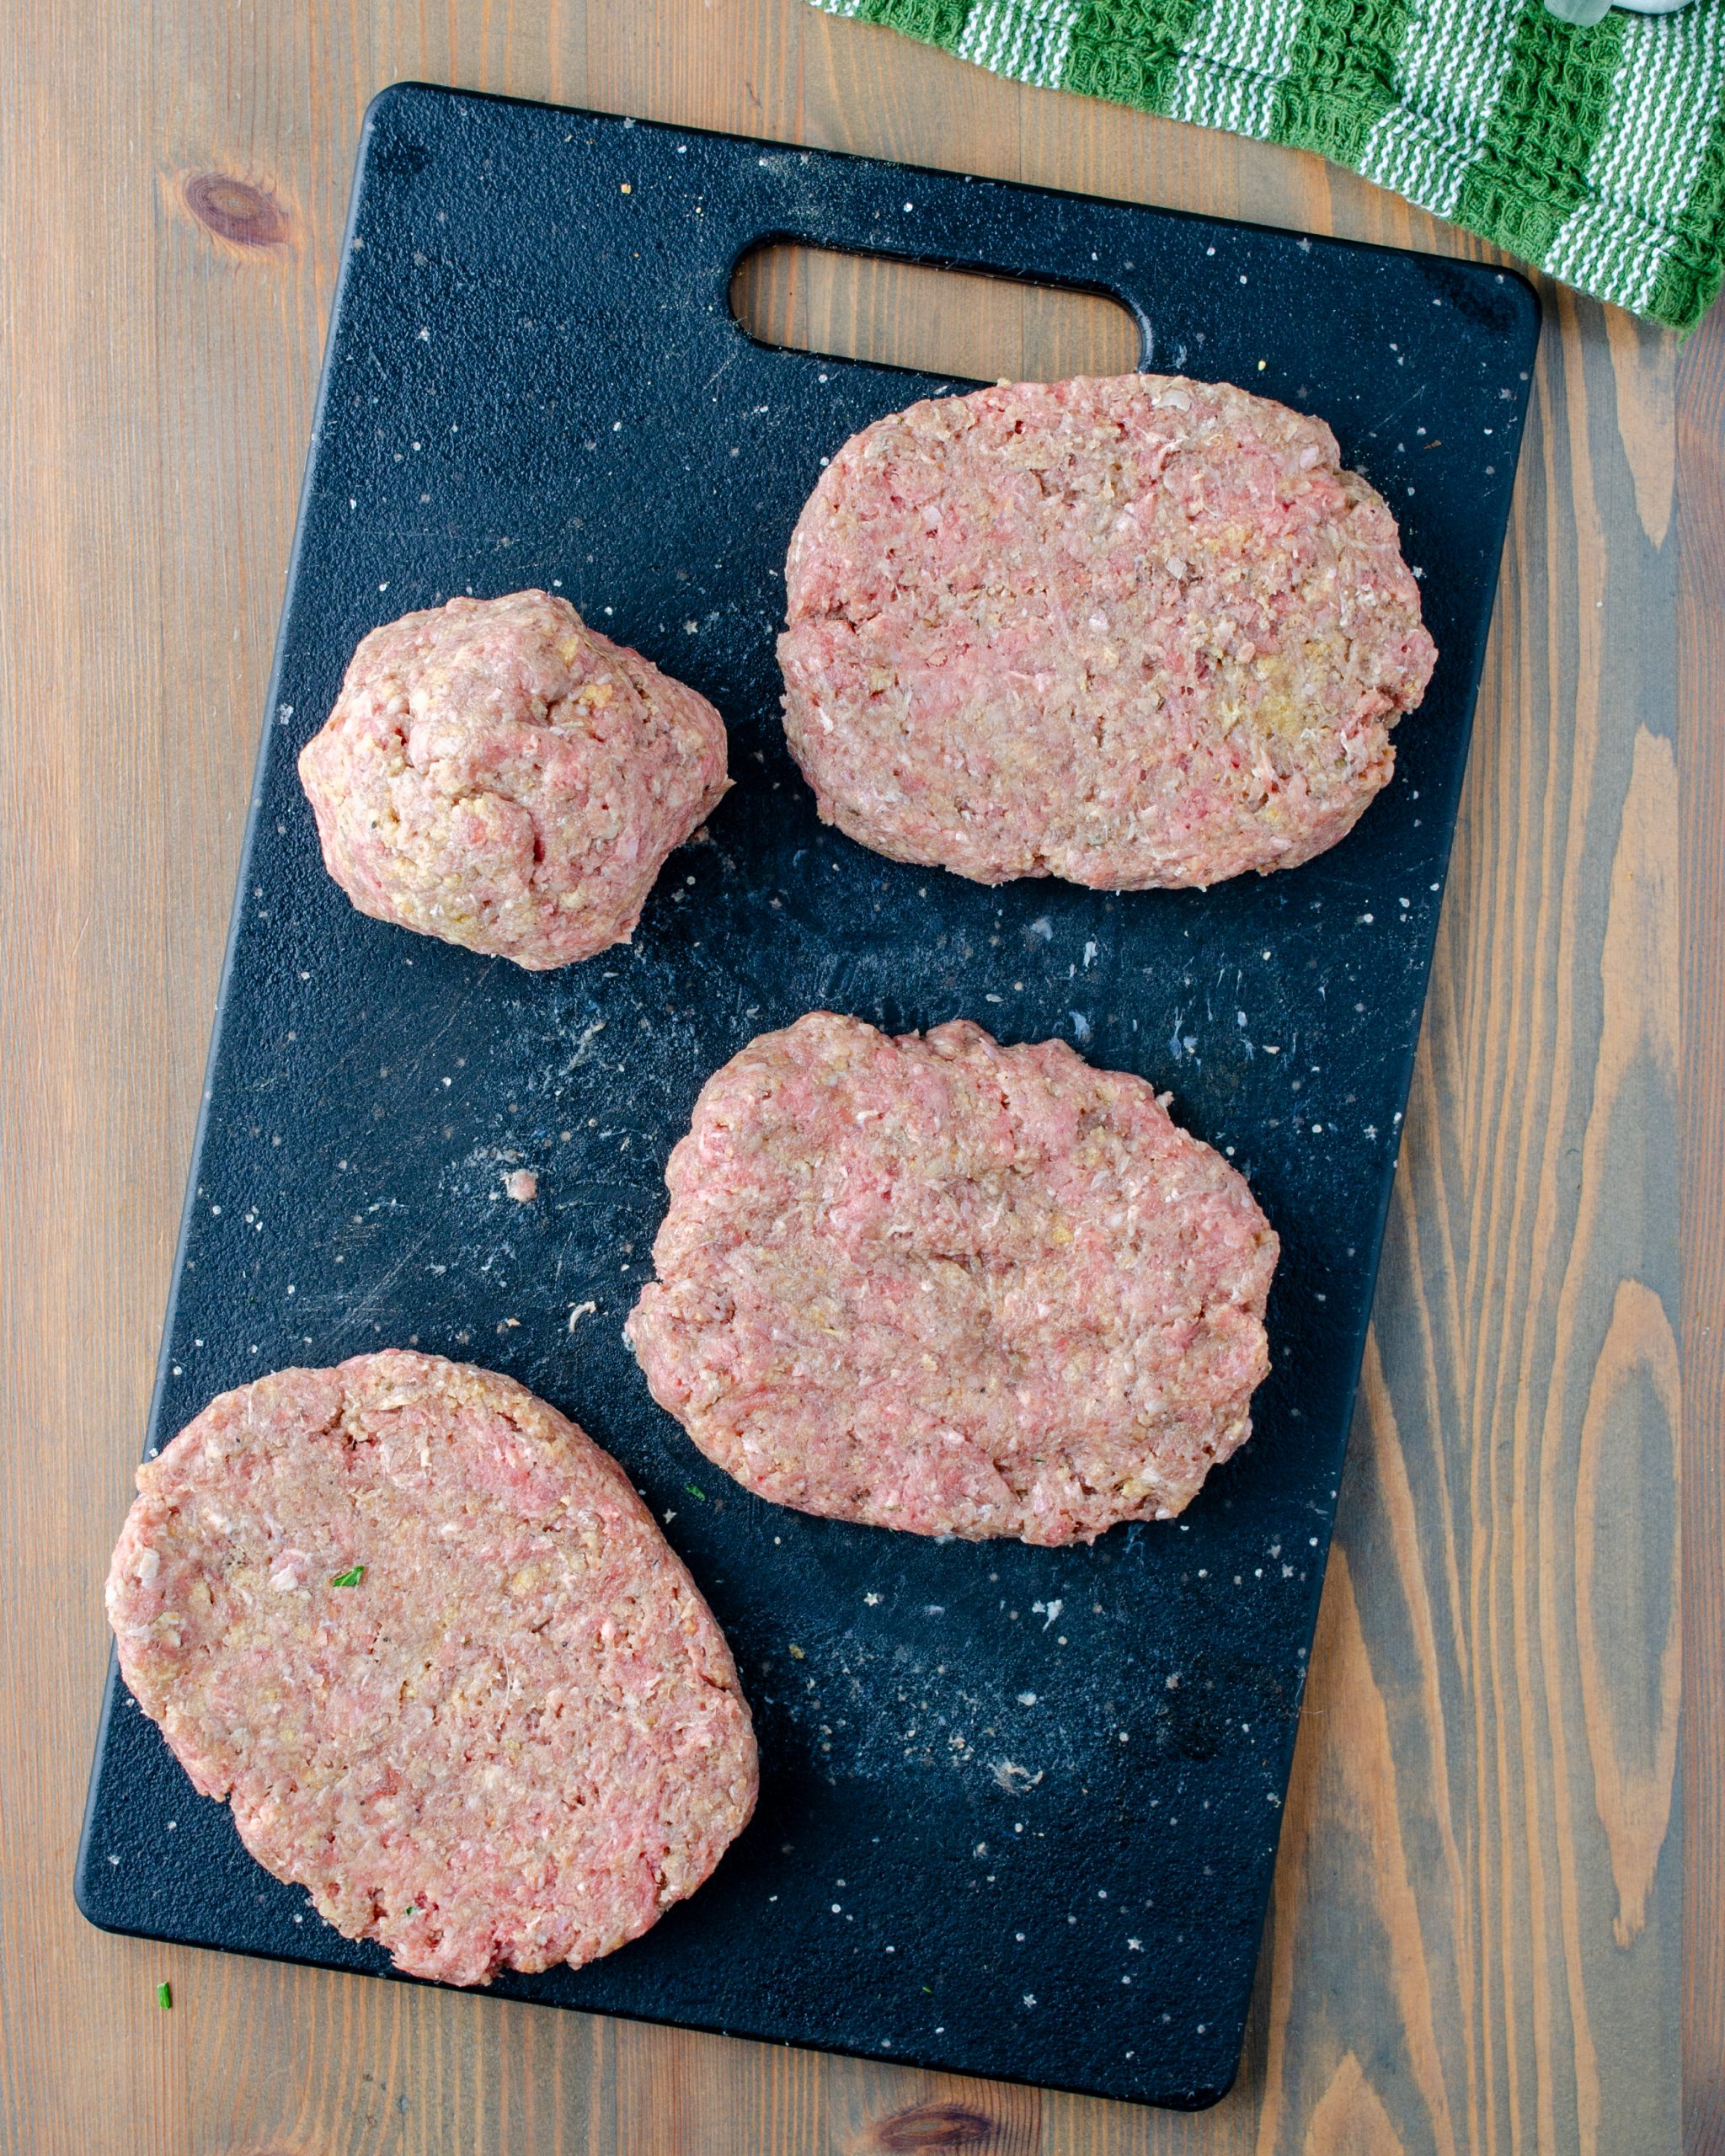 Make the ground beef into 4 individual oval patties